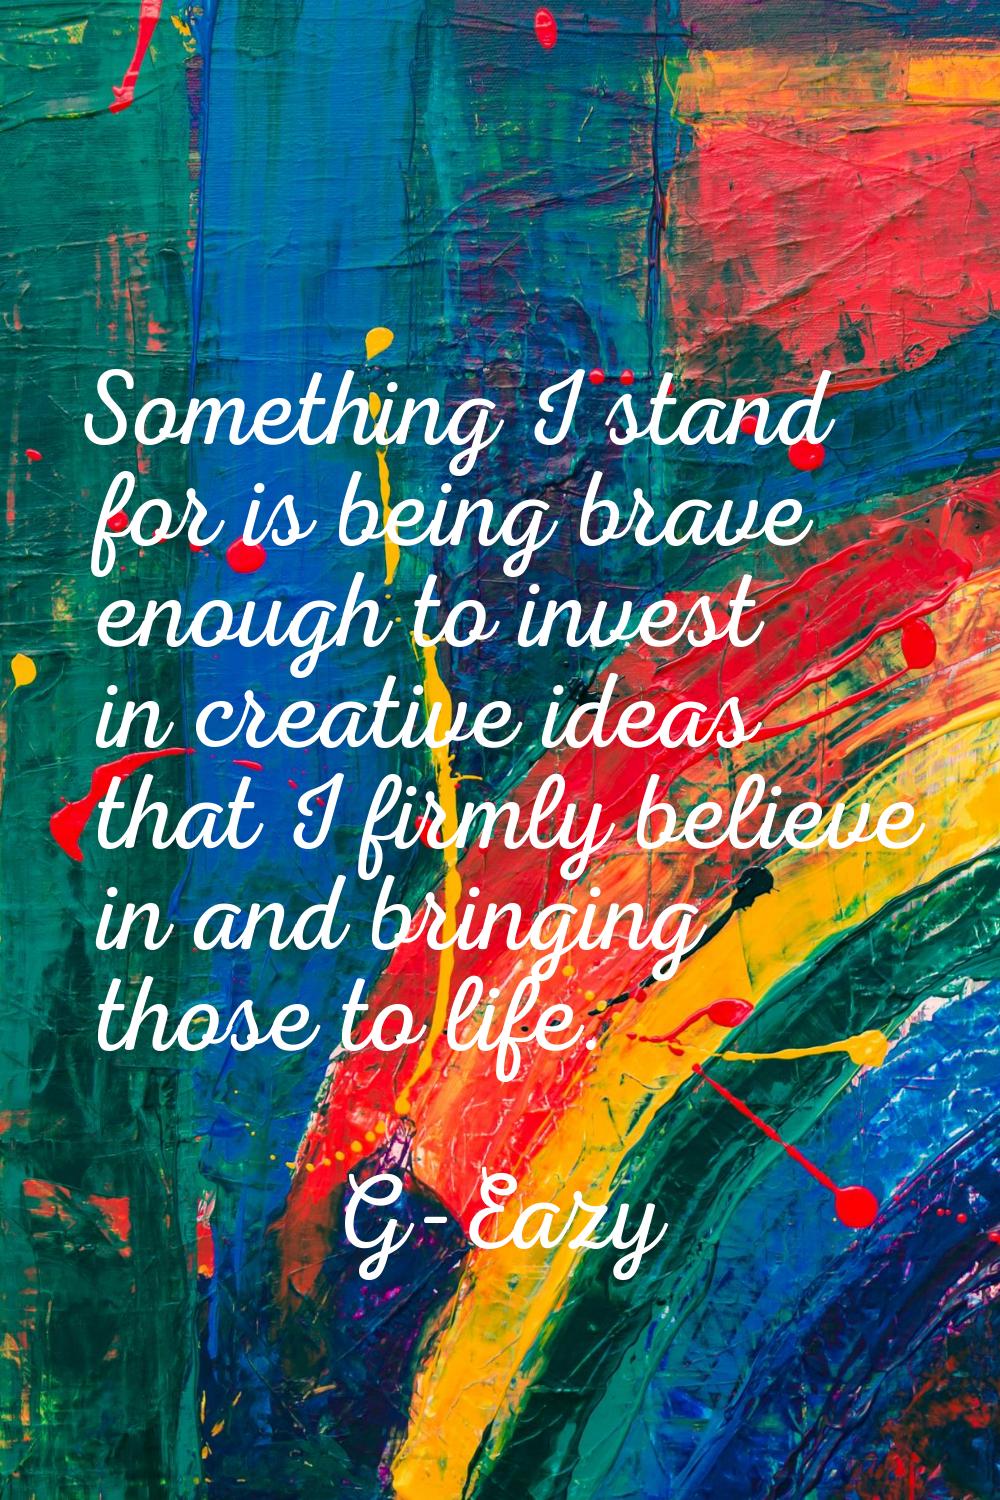 Something I stand for is being brave enough to invest in creative ideas that I firmly believe in an